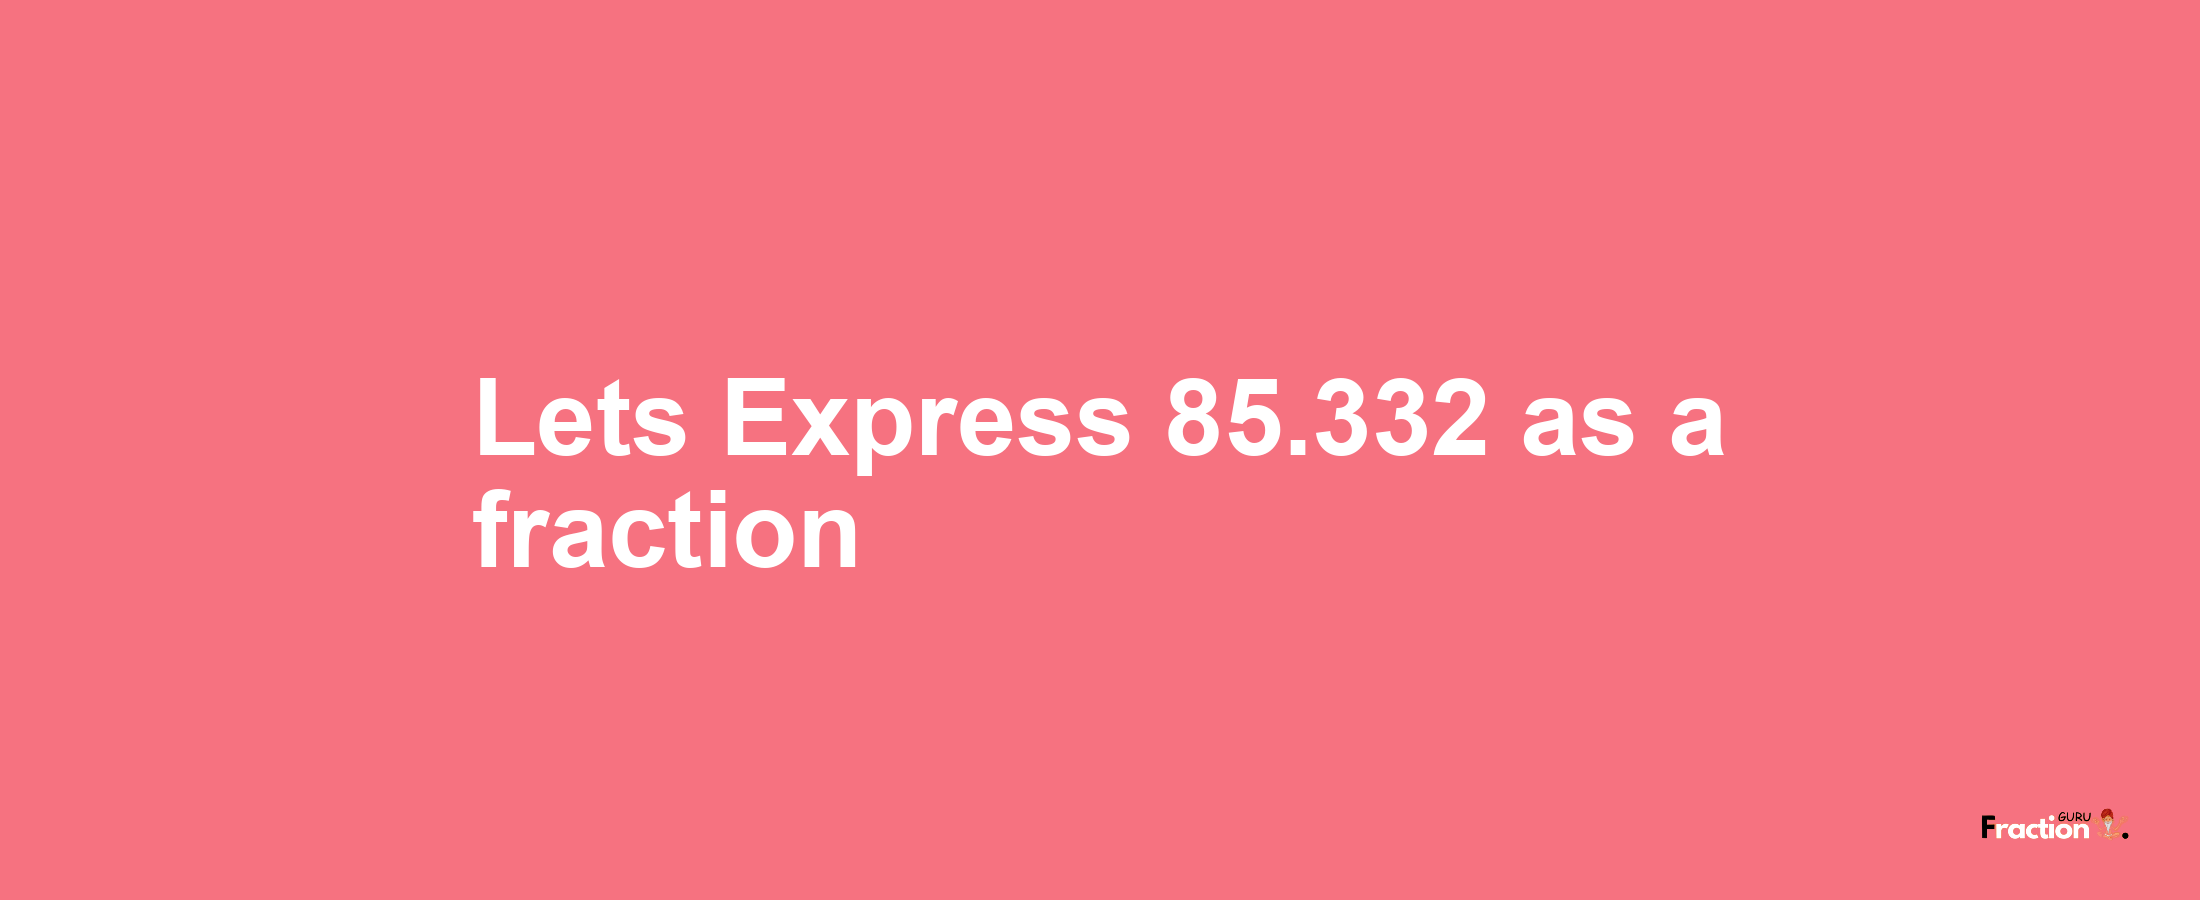 Lets Express 85.332 as afraction